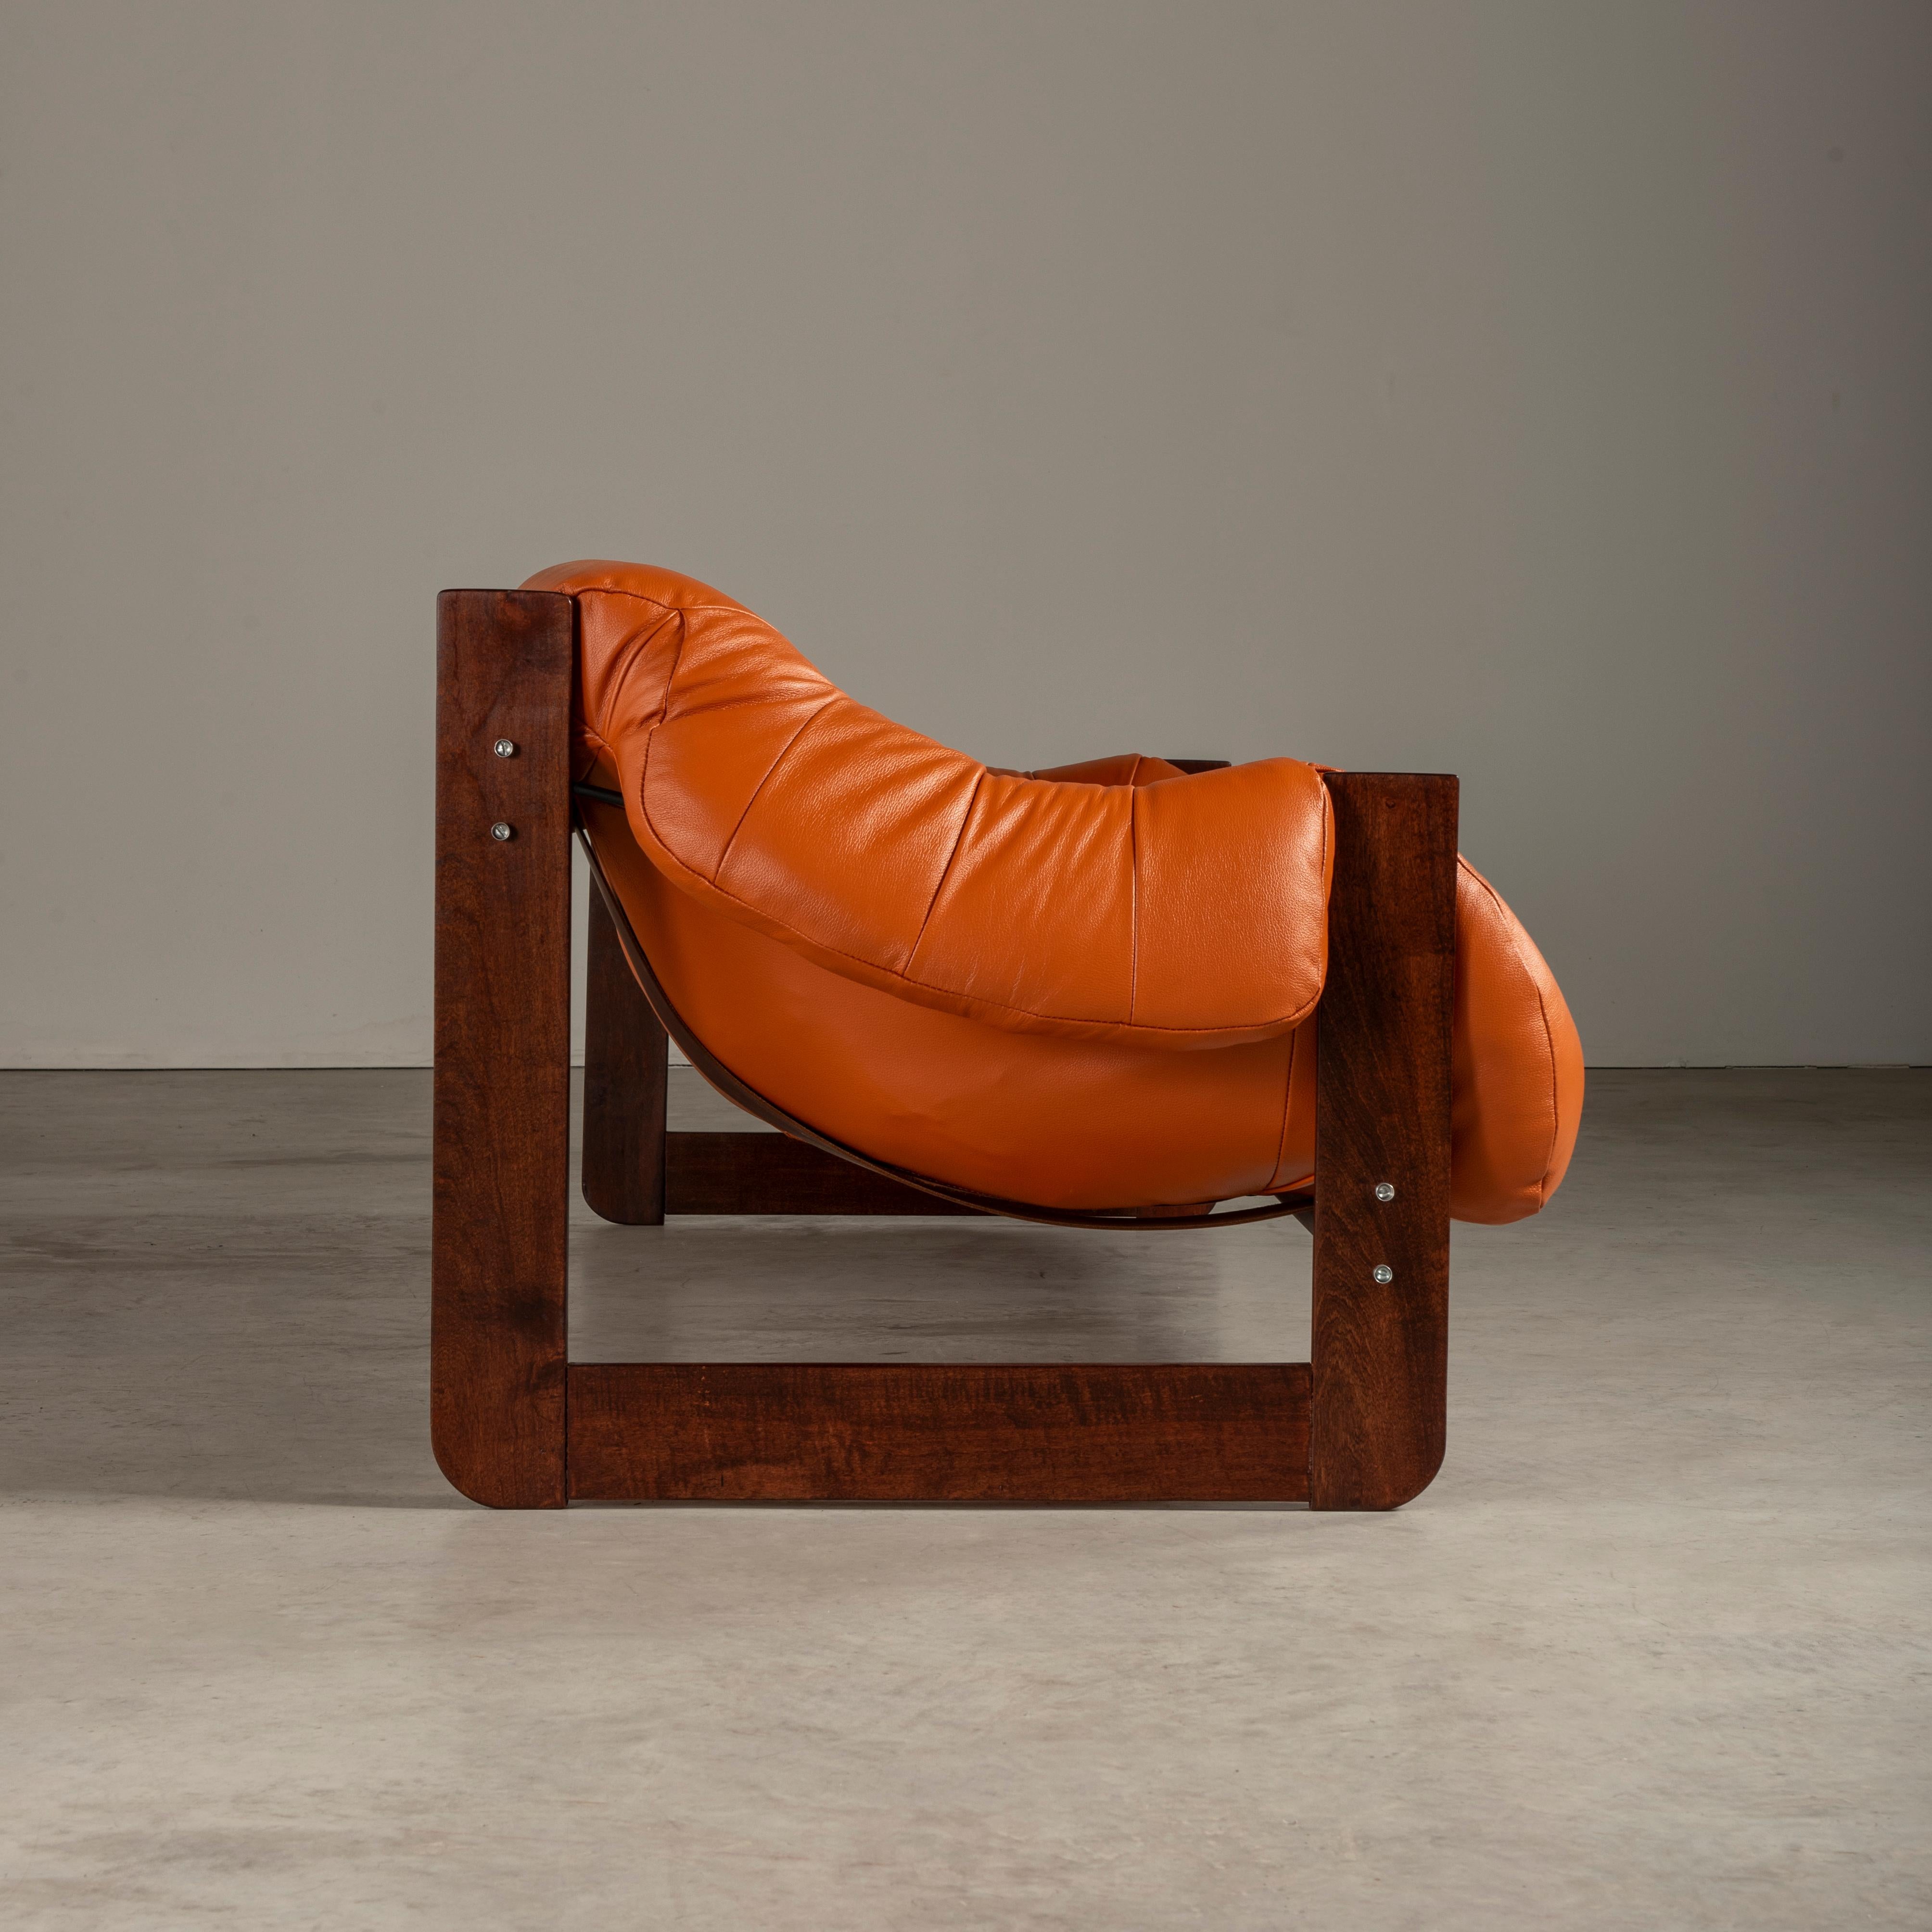 The MP-97 sofa designed by Percival Lafer is a truly exceptional piece of furniture. This sofa is constructed with a solid wood frame and features high-quality leather upholstery in a stunning shade of orange. It provides unparalleled comfort and